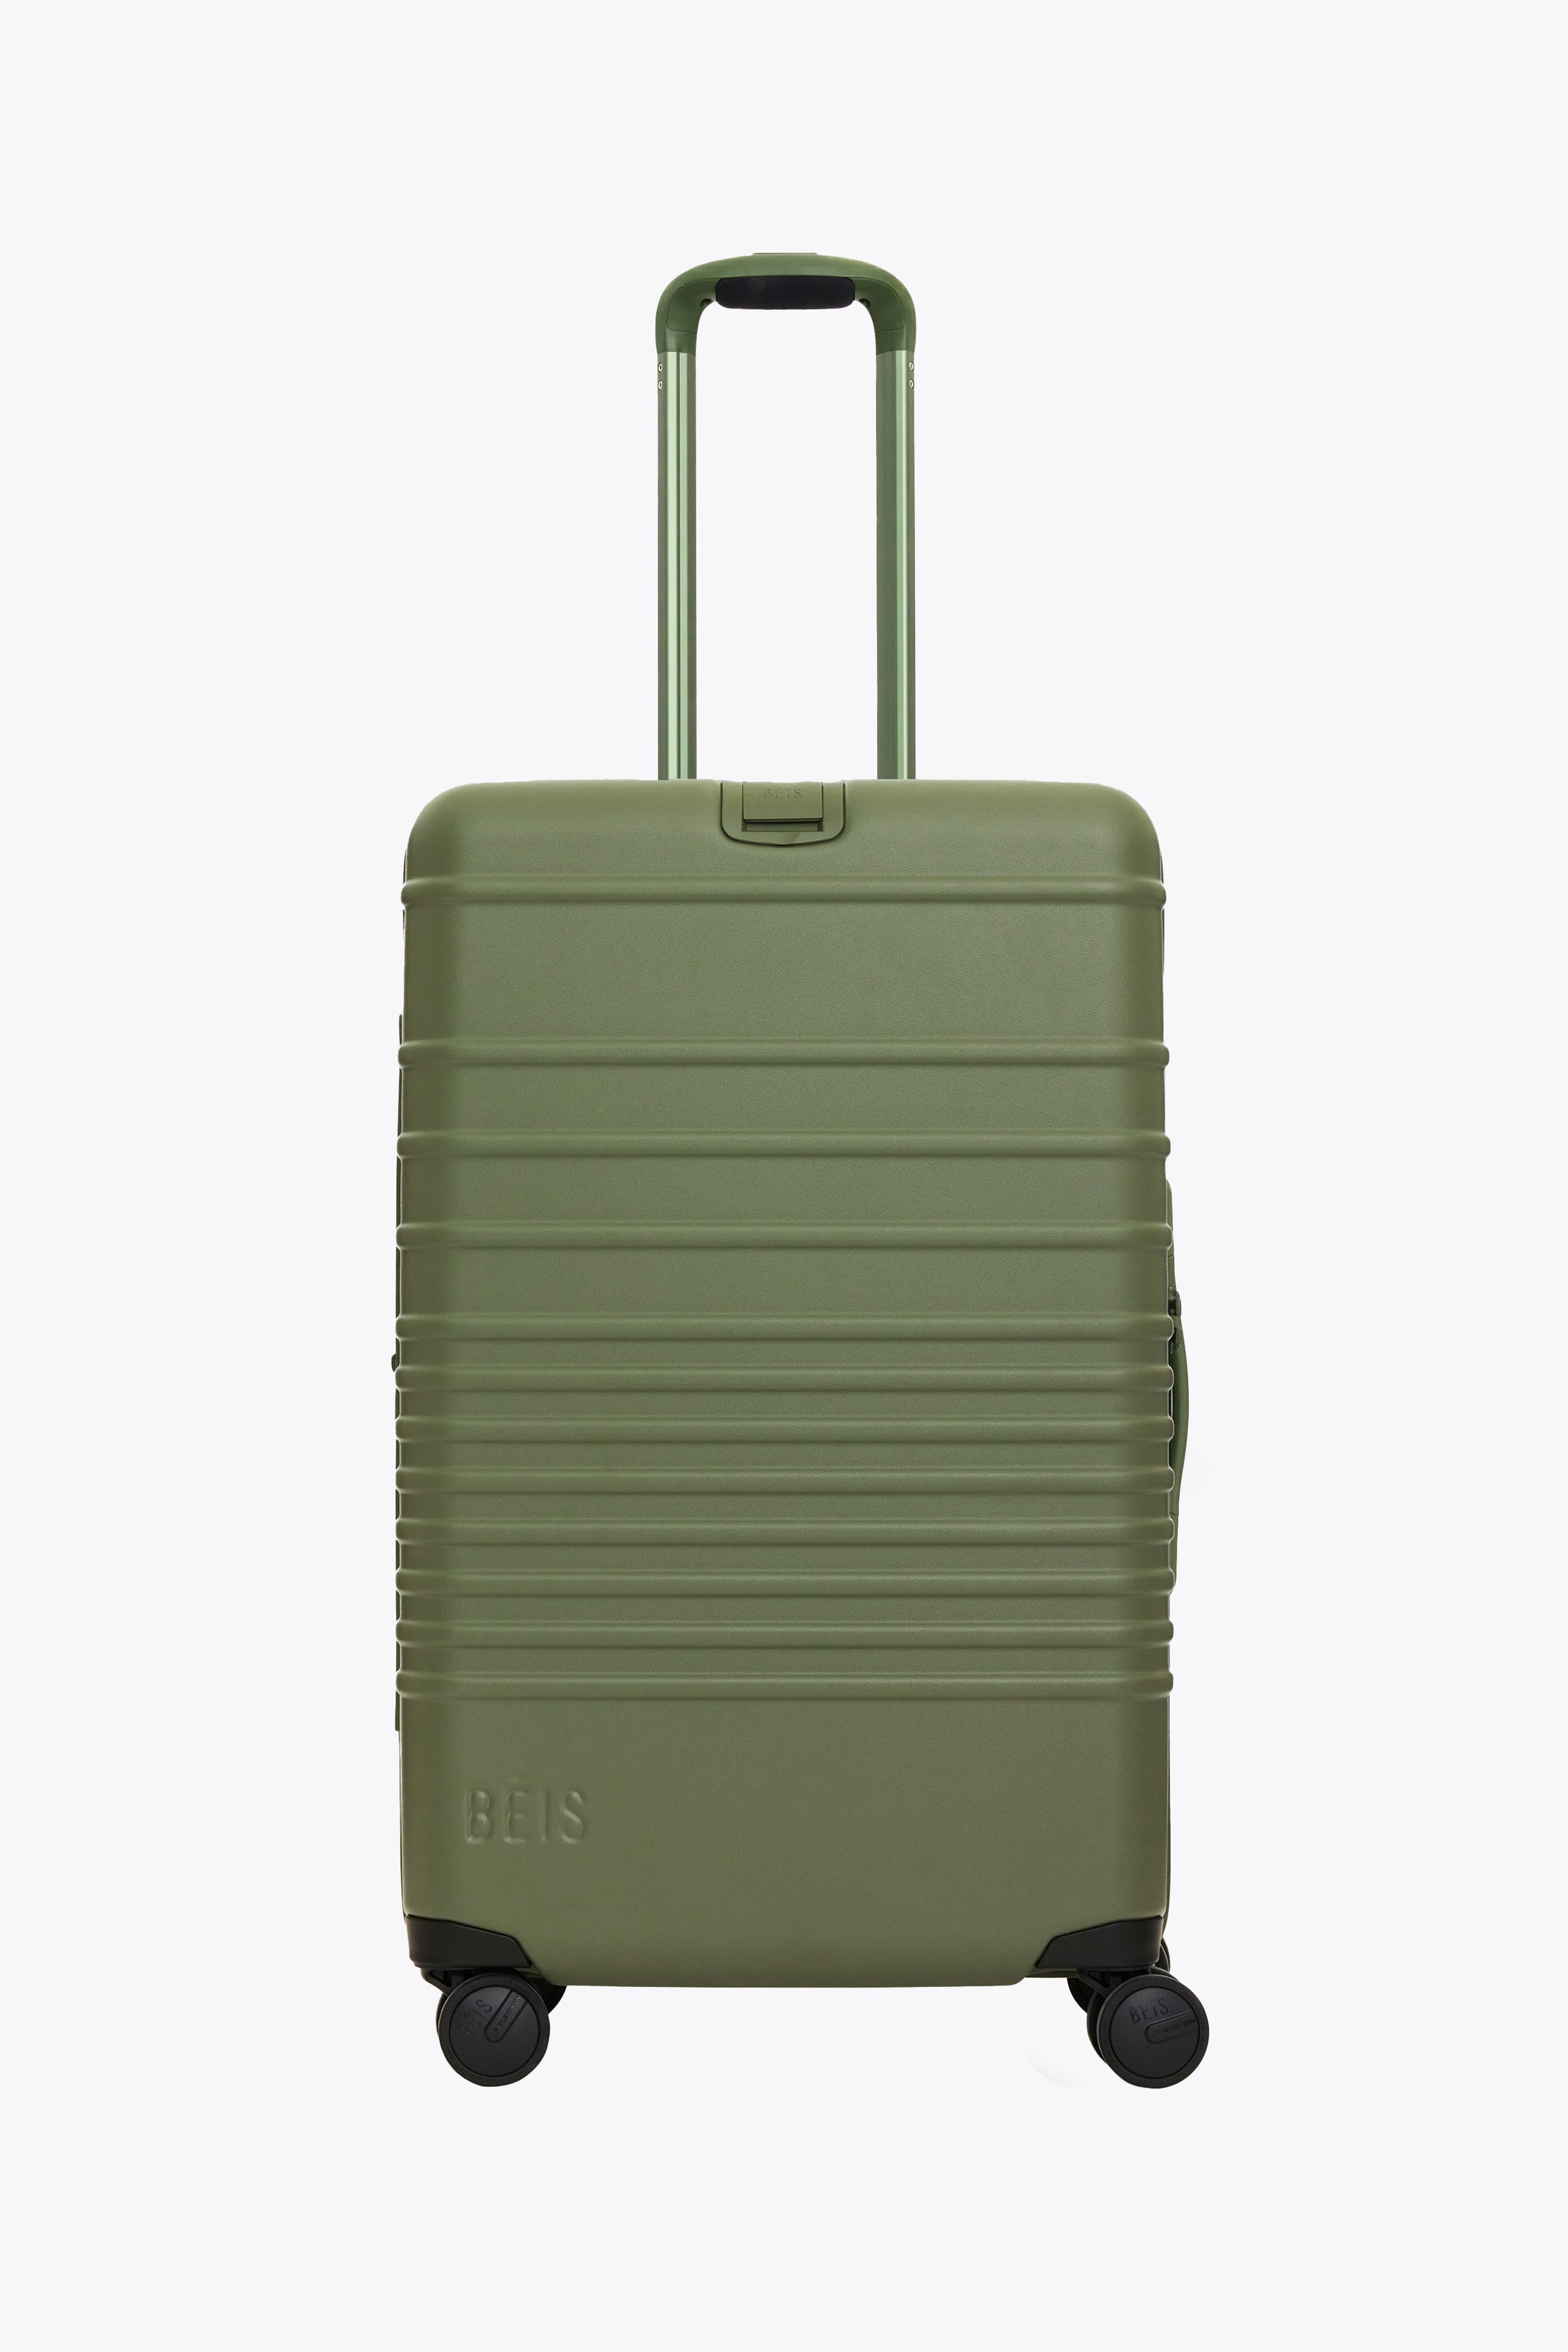 BÉIS 'The Medium Check-In Roller' in Olive - Olive Green 26